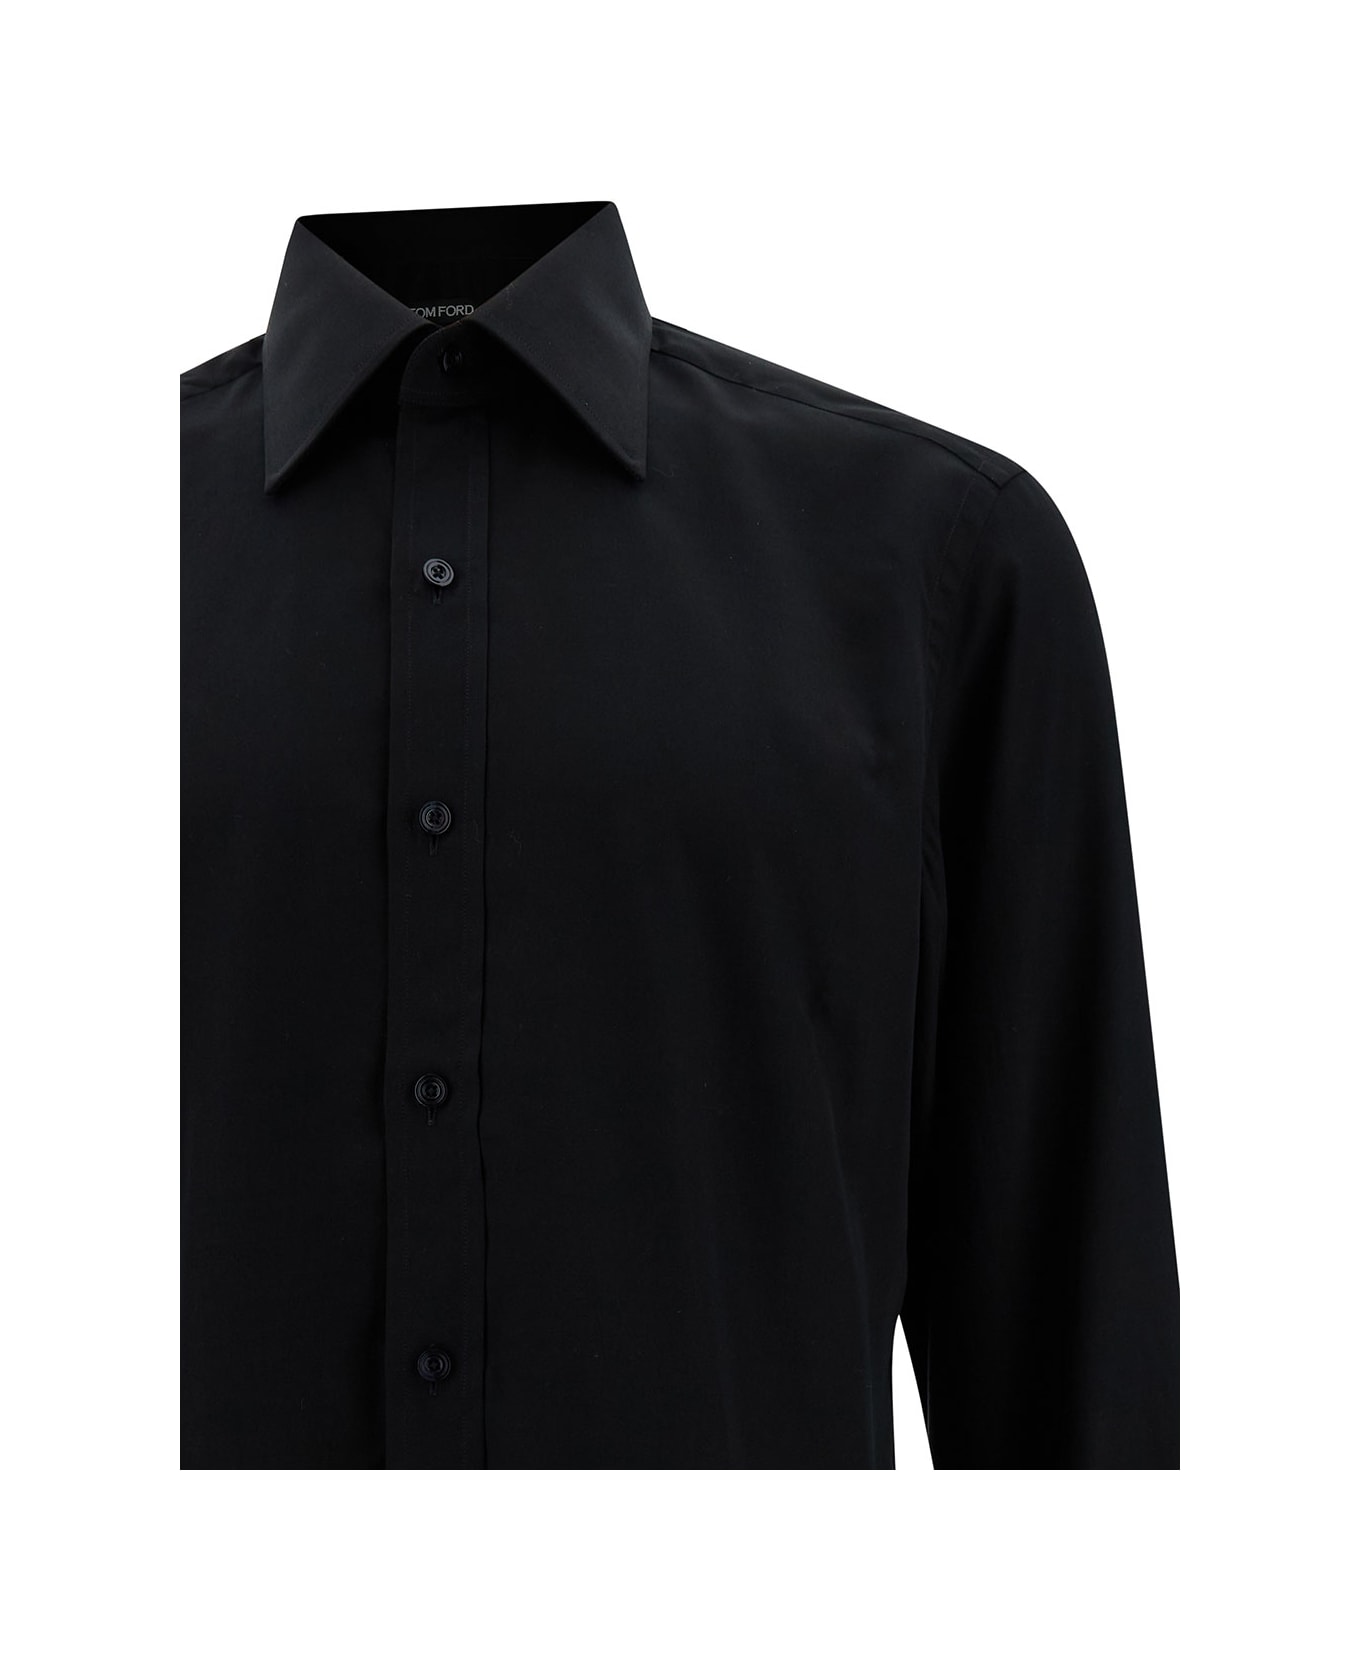 Tom Ford Black Shirt With Pointed Collar In Silk Blend Man - Black